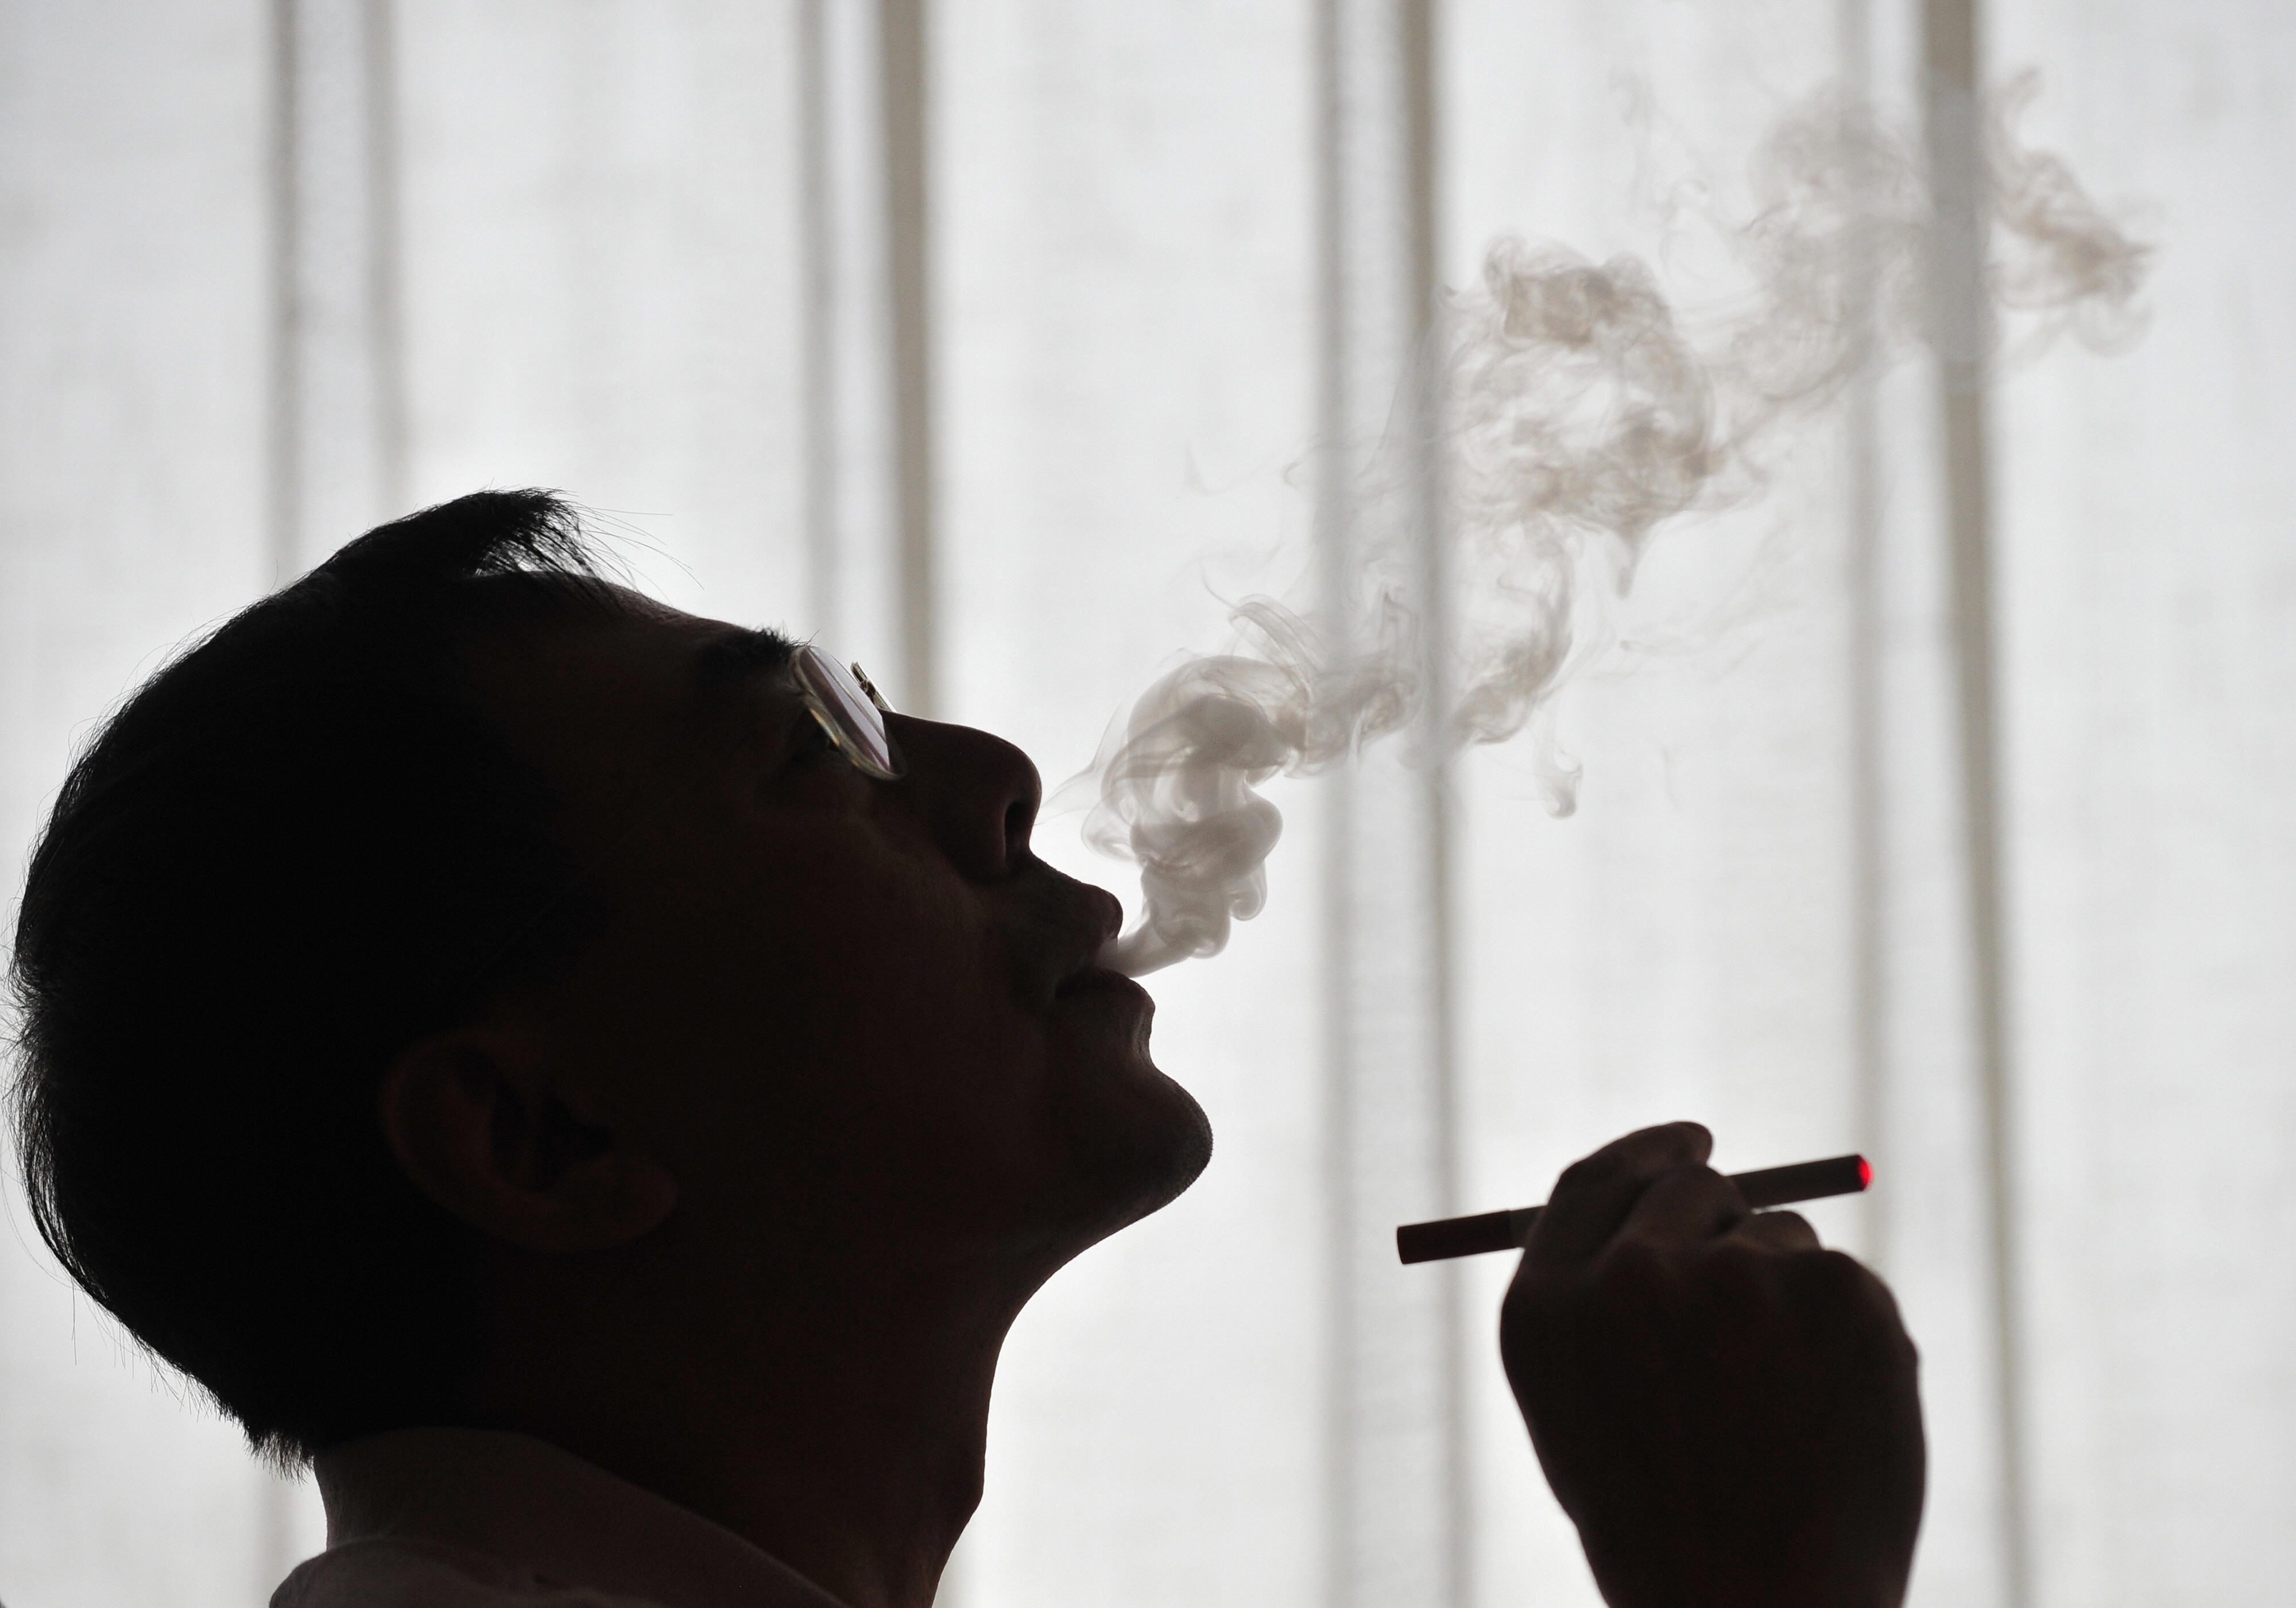 The inventor of the electronic cigarette, Hon Lik smokes his invention in Beiijng on May 25, 2009. Also known as an 'e-cigarette', the battery-powered device is designed as an alternative to cigarettes, cigars and pipes, and provides inhaled doses of nicotine by delivering a vaporized propylene glycol/nicotine solution, while also providing the physical sensation and flavors similar to inhaled tobacco smoke. With 350 million tobacco smokers nationwide, China will join the world in observing World No Tobacco Day on May 31. AFP PHOTO/Frederic J. BROWN (Photo credit should read FREDERIC J. BROWN/AFP/Getty Images)